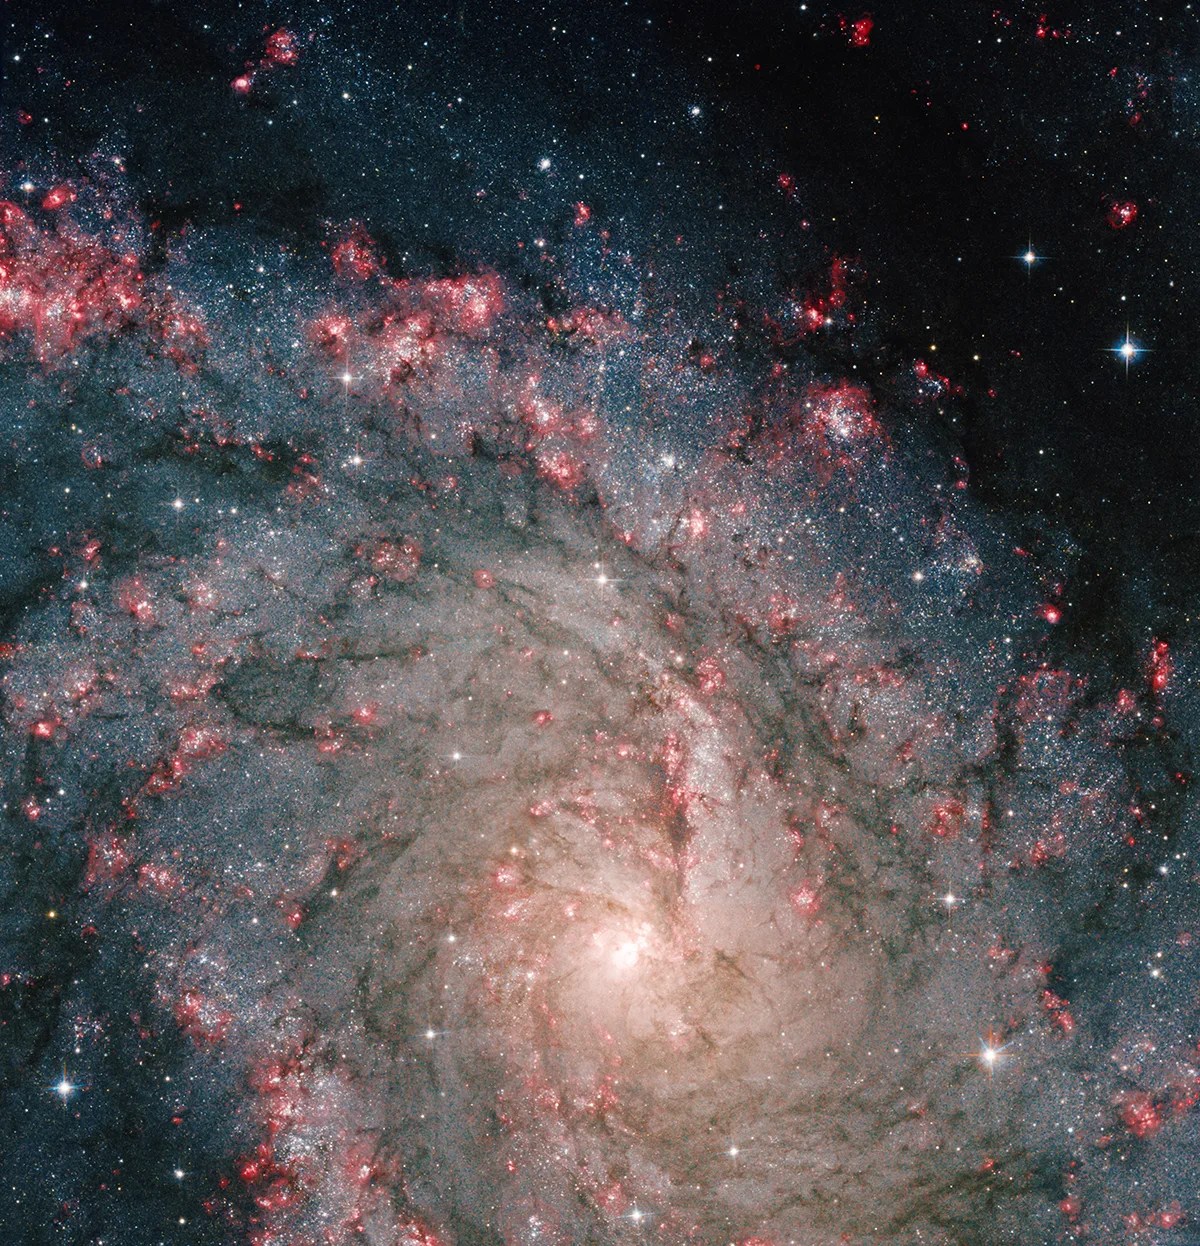 Large spiral galaxy with bright white center, surrounded by countless blue, white, and purple stars. Light blue dust and gas surrounds it.